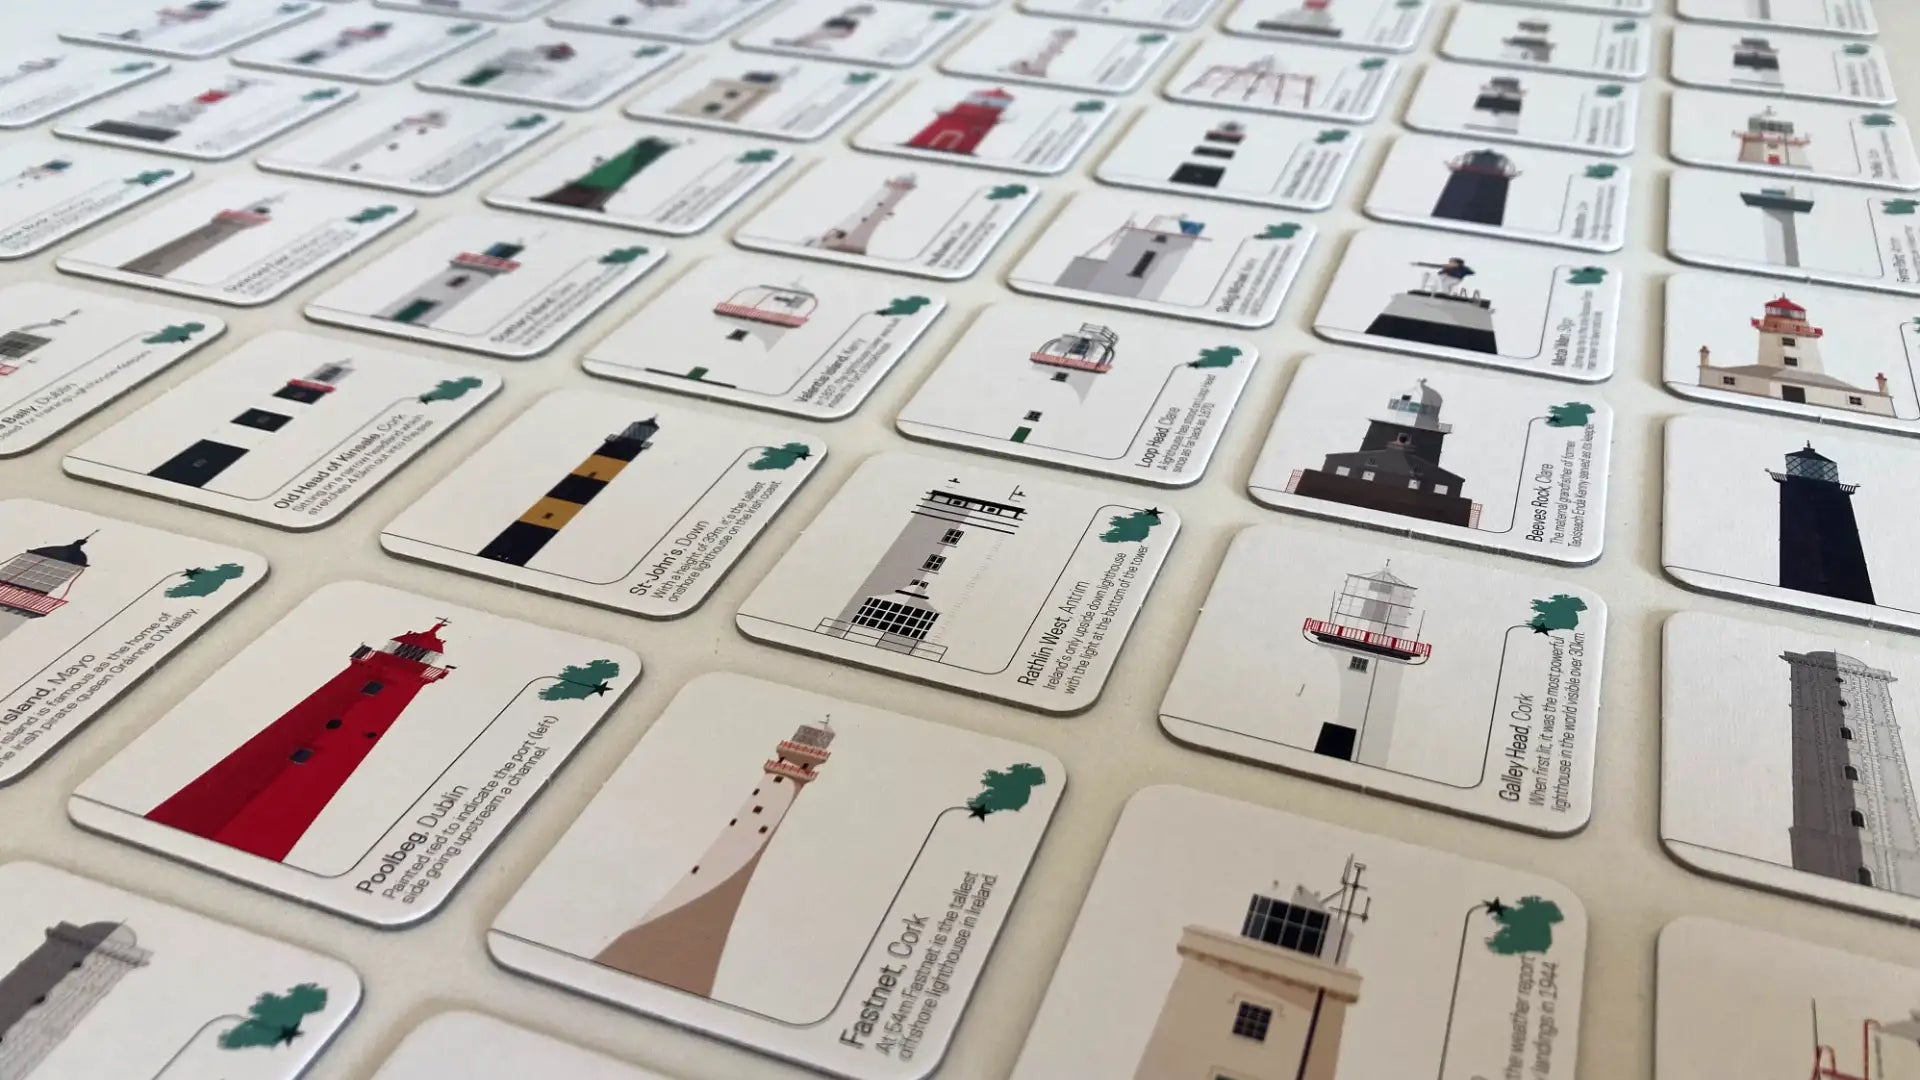 Selection of tiles from the Lighthouses of Ireland Memory game